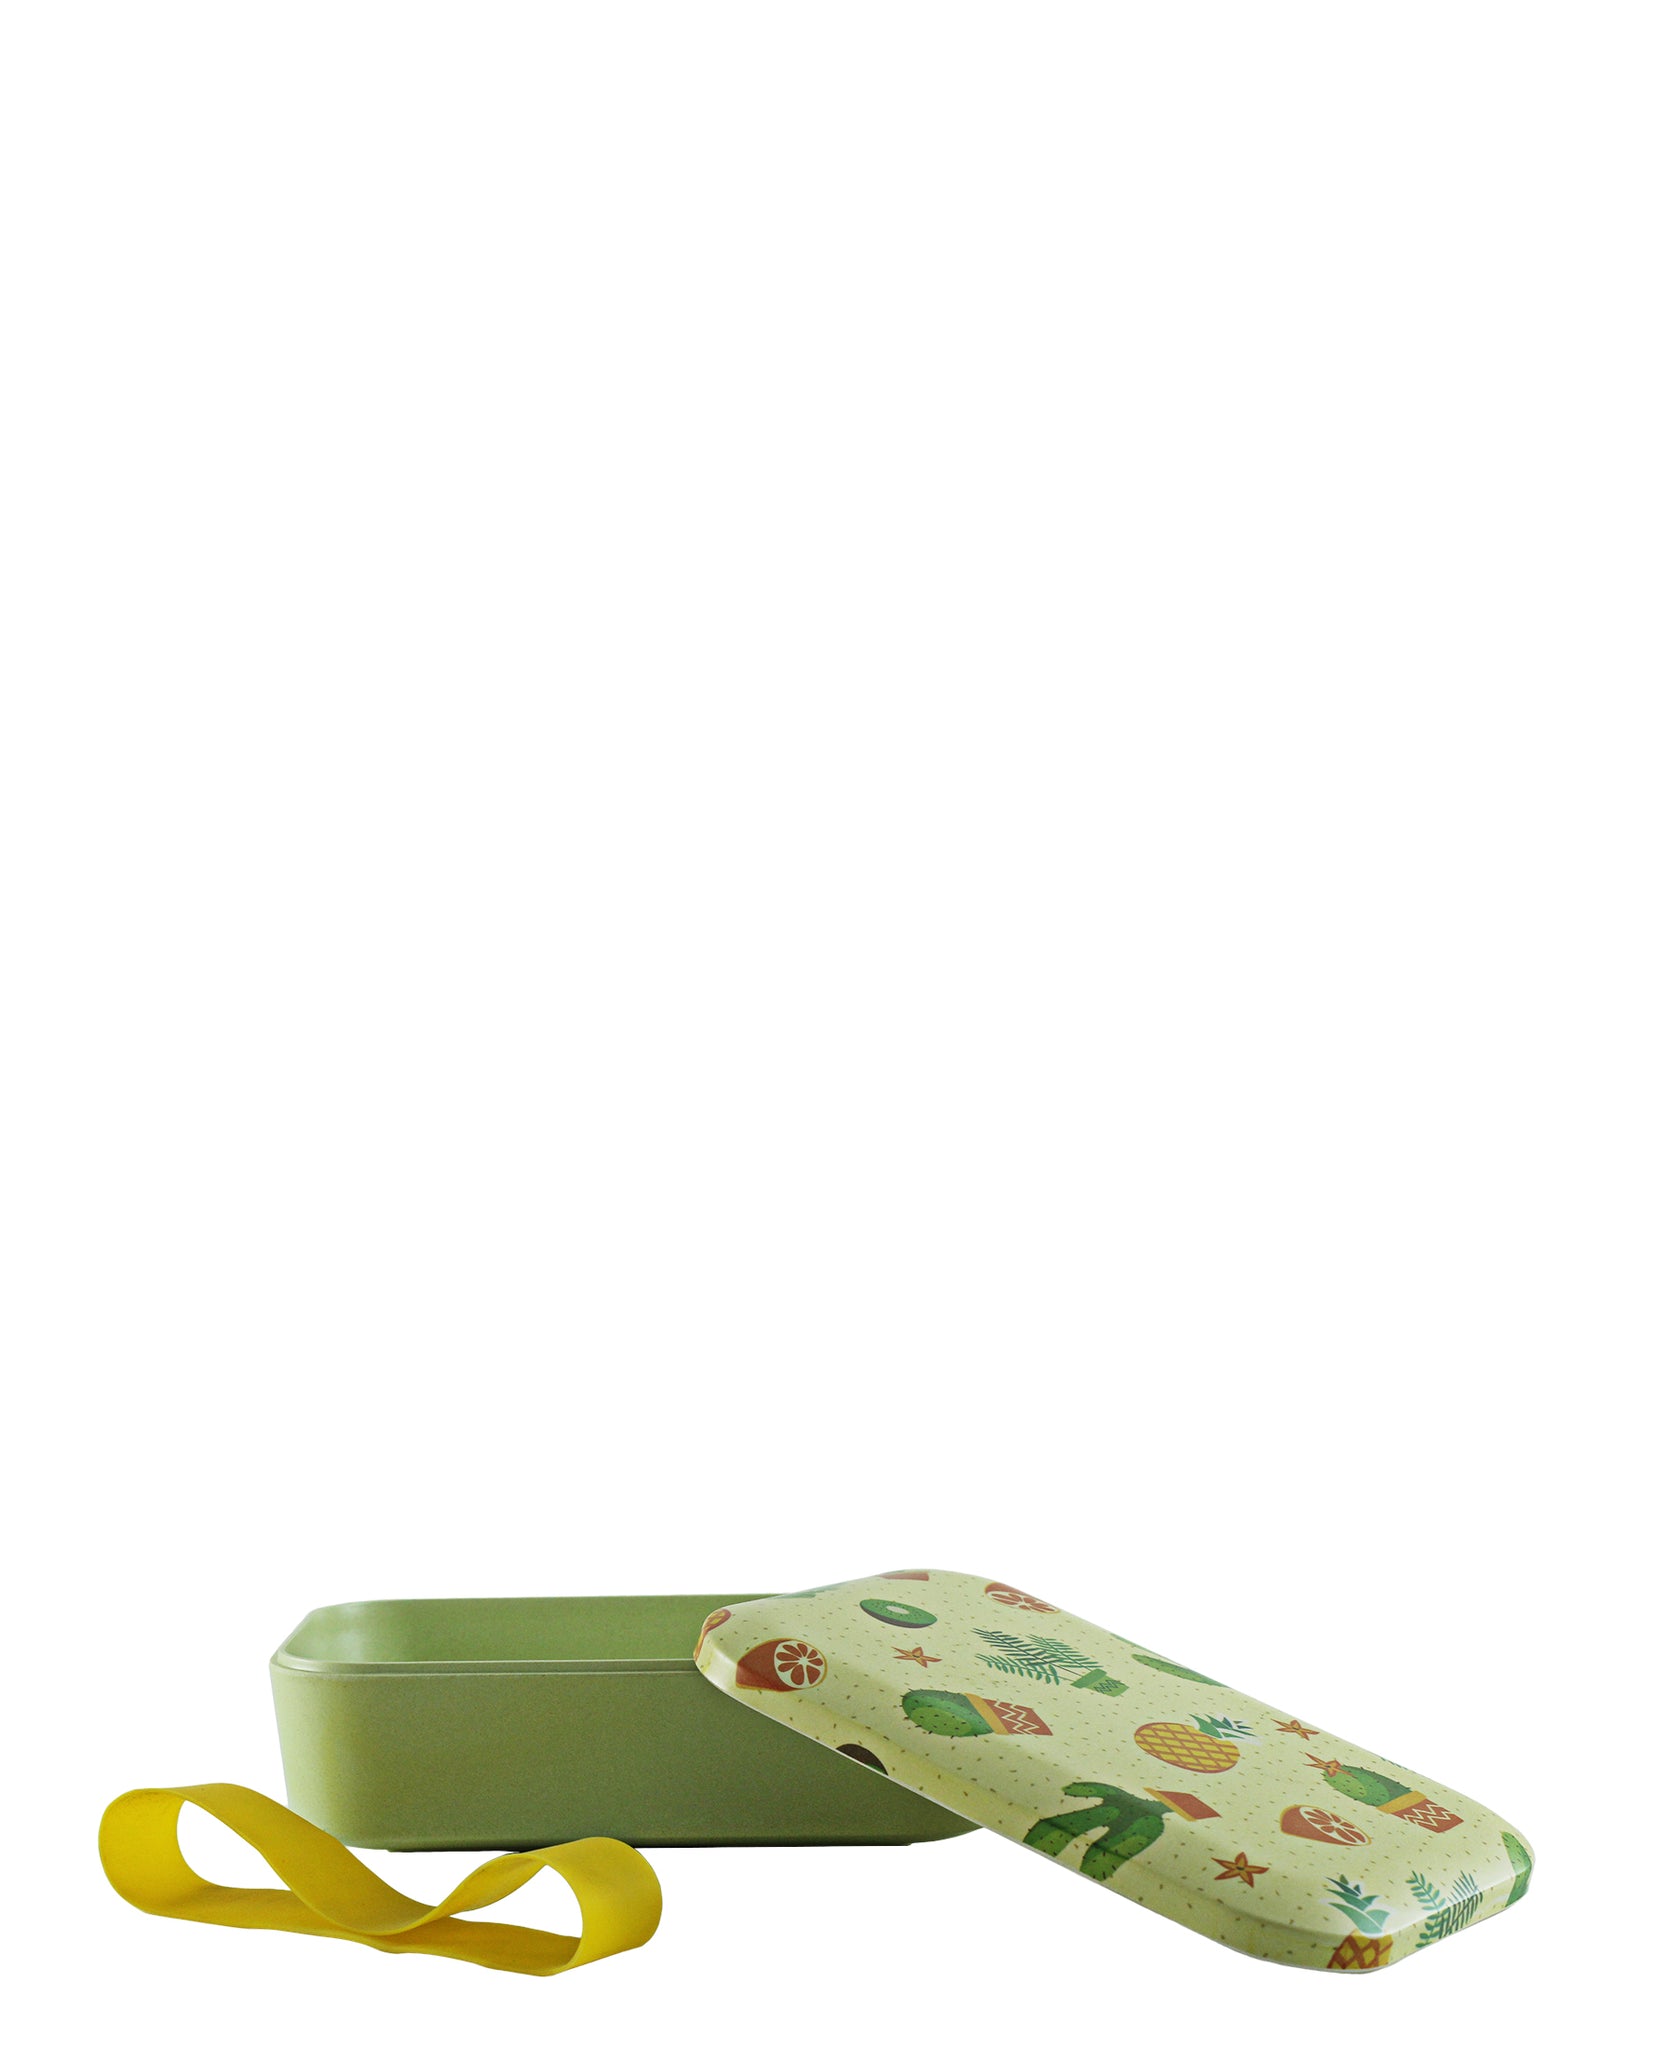 Kitchen Life Bamboo Lunch Box - Green